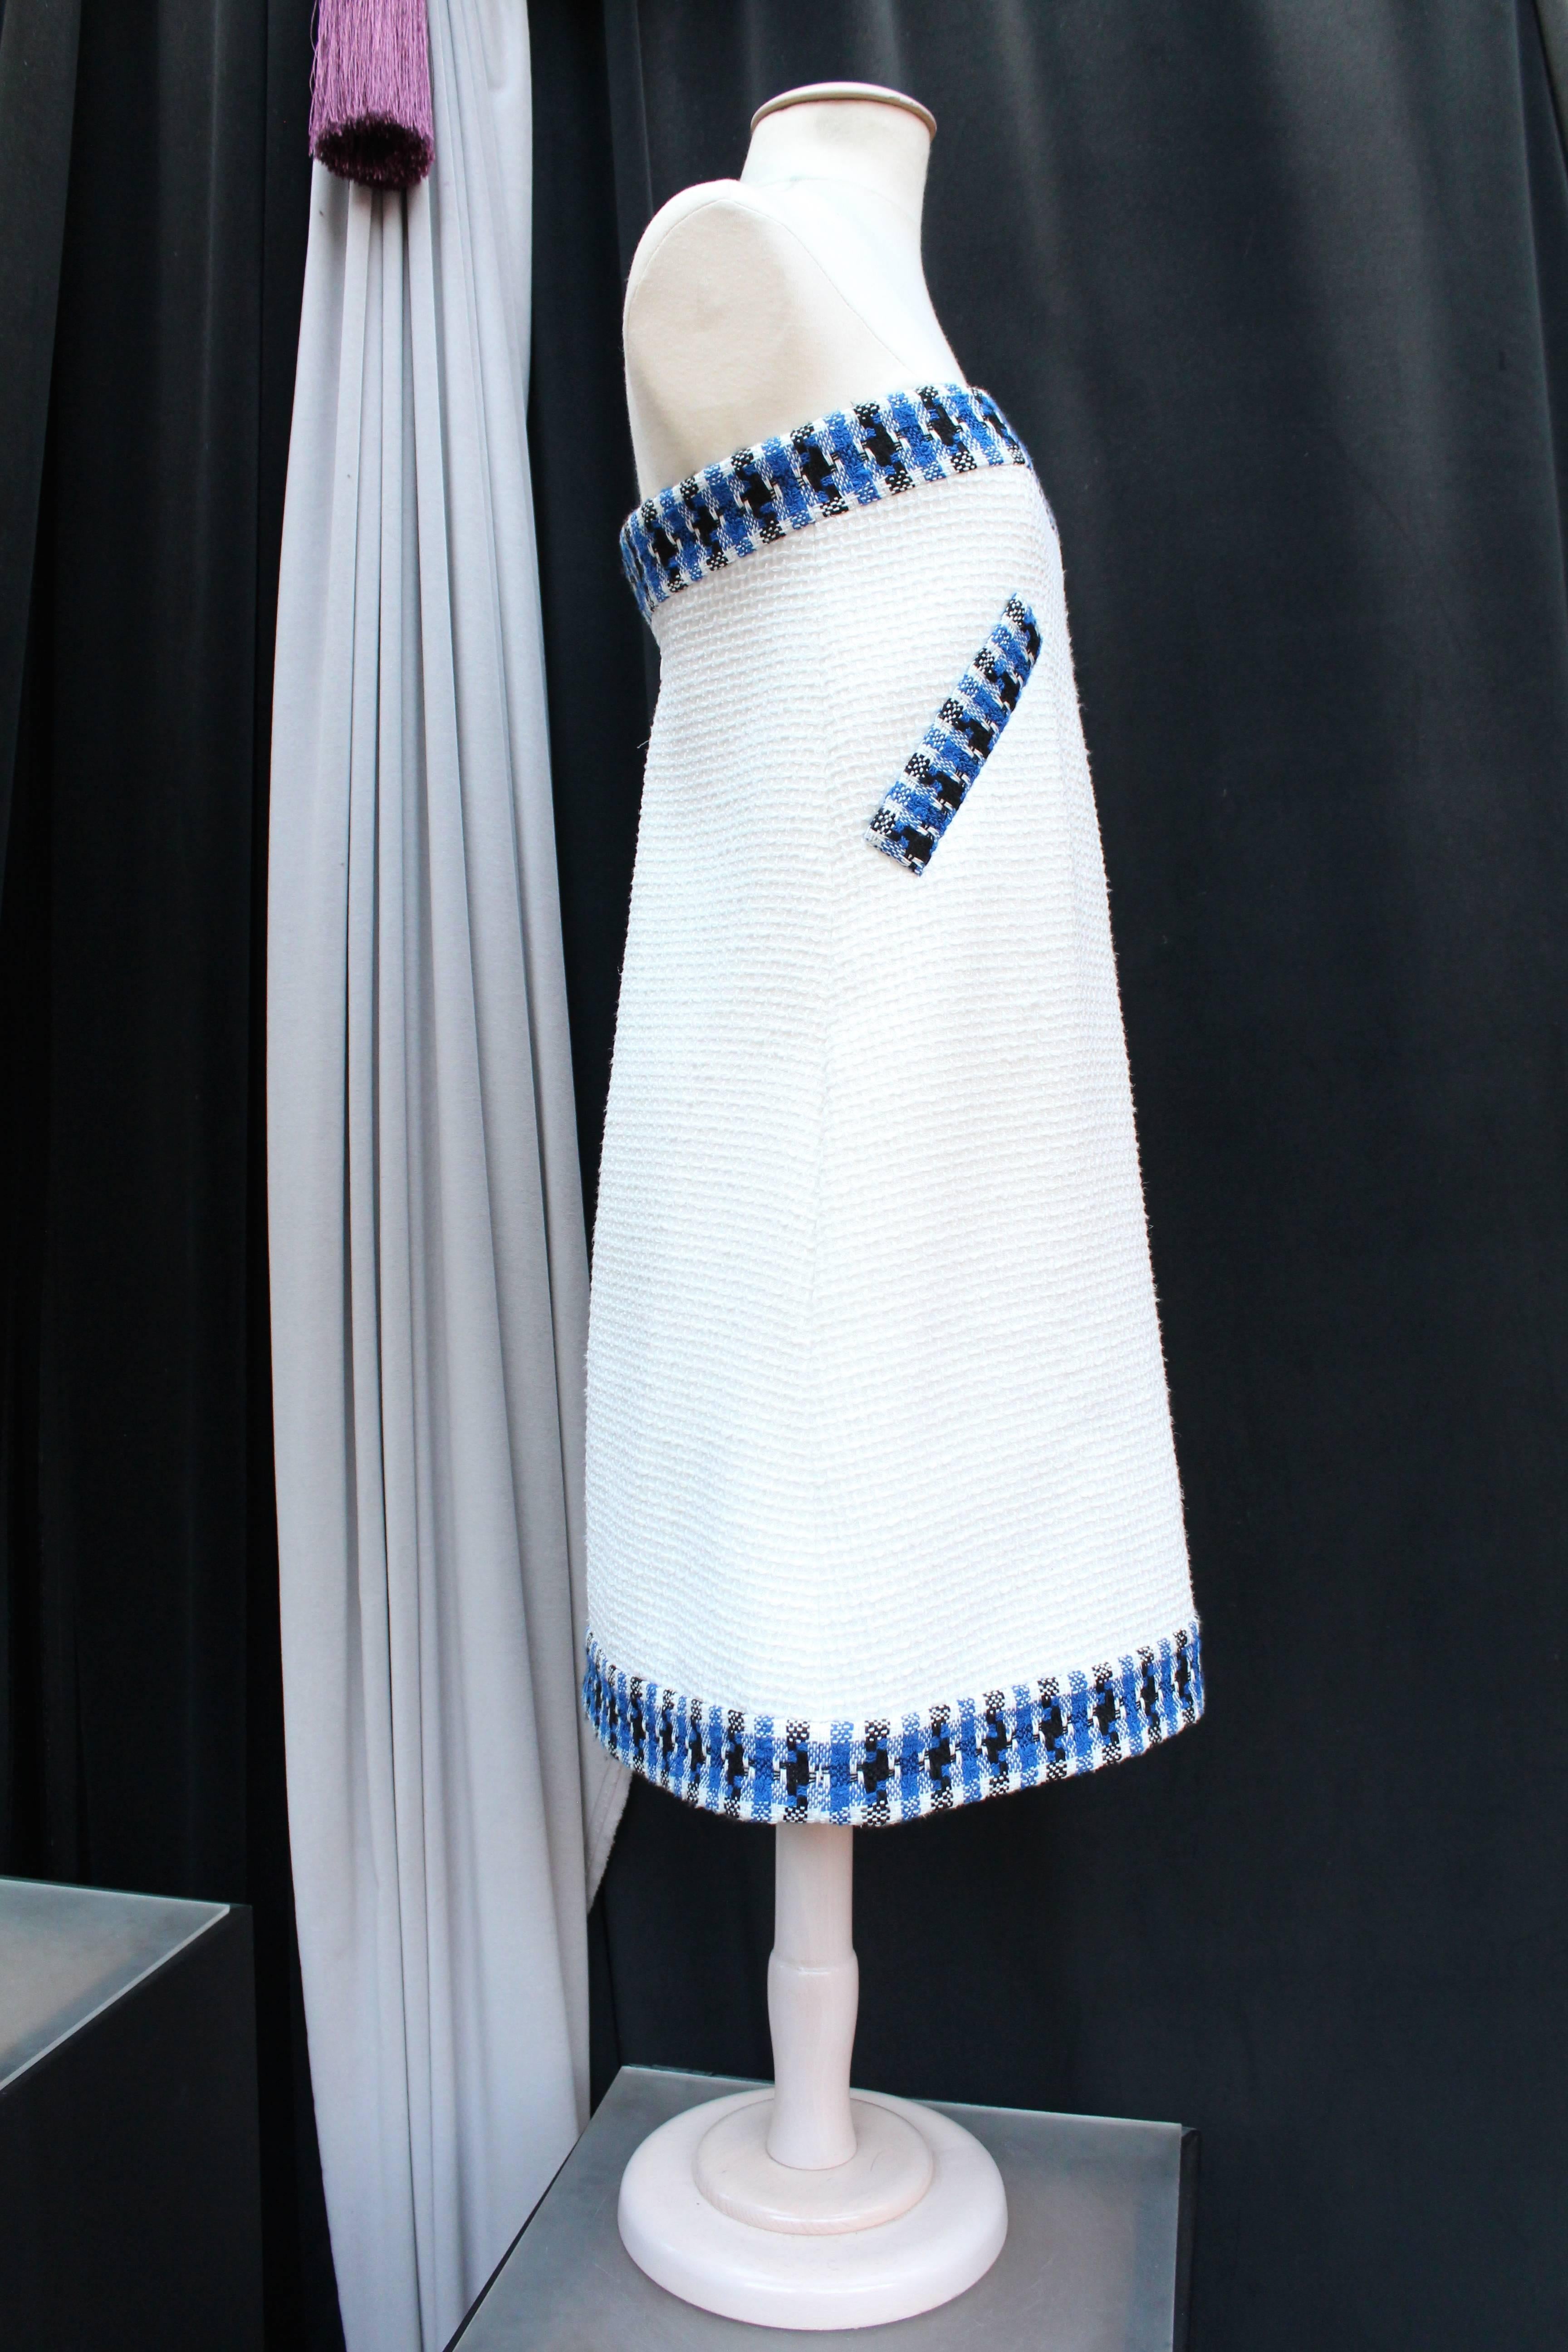 2013 Chanel Strapless Dress in White Blue and Black Cotton 1